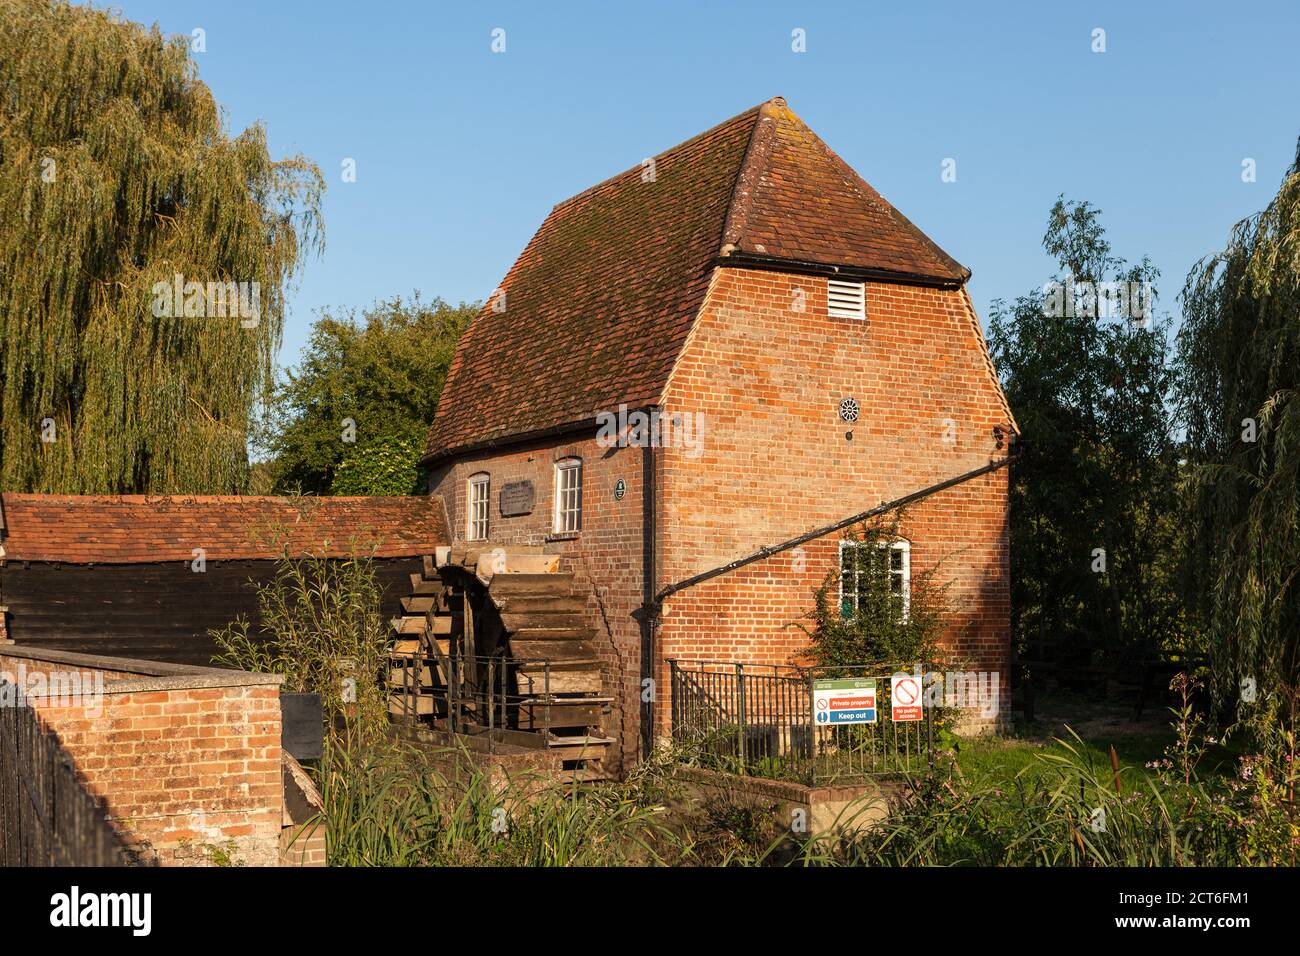 Picturesque early 19th century mill, situated in delightful surroundings on the banks of the River Mole in Cobham, Surrey. Stock Photo